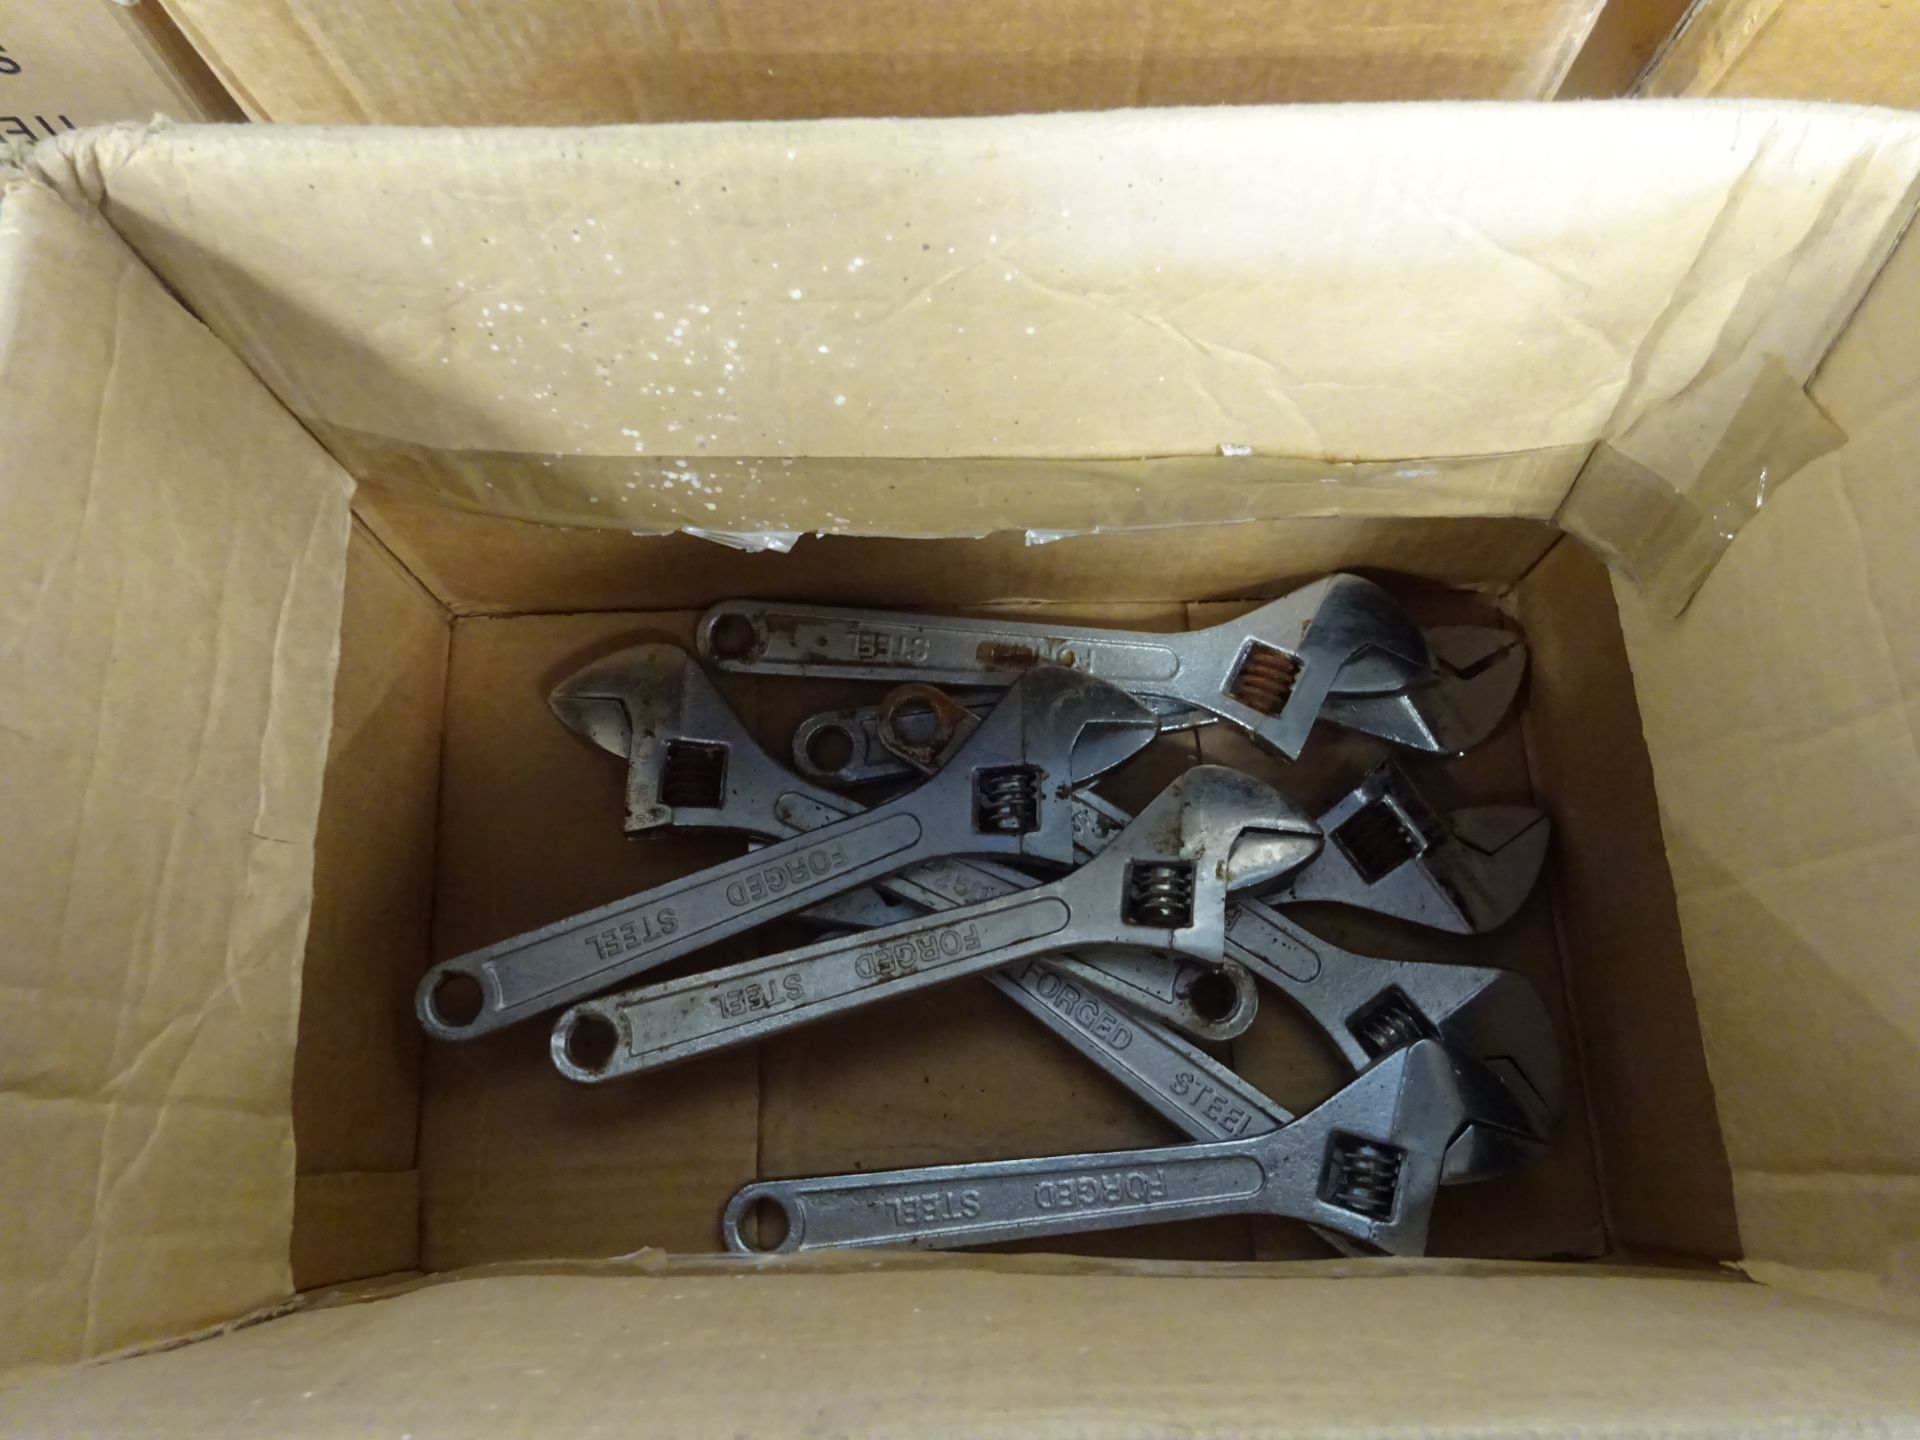 BOX OF 10 LG ADJUSTIBLE SPANNERS